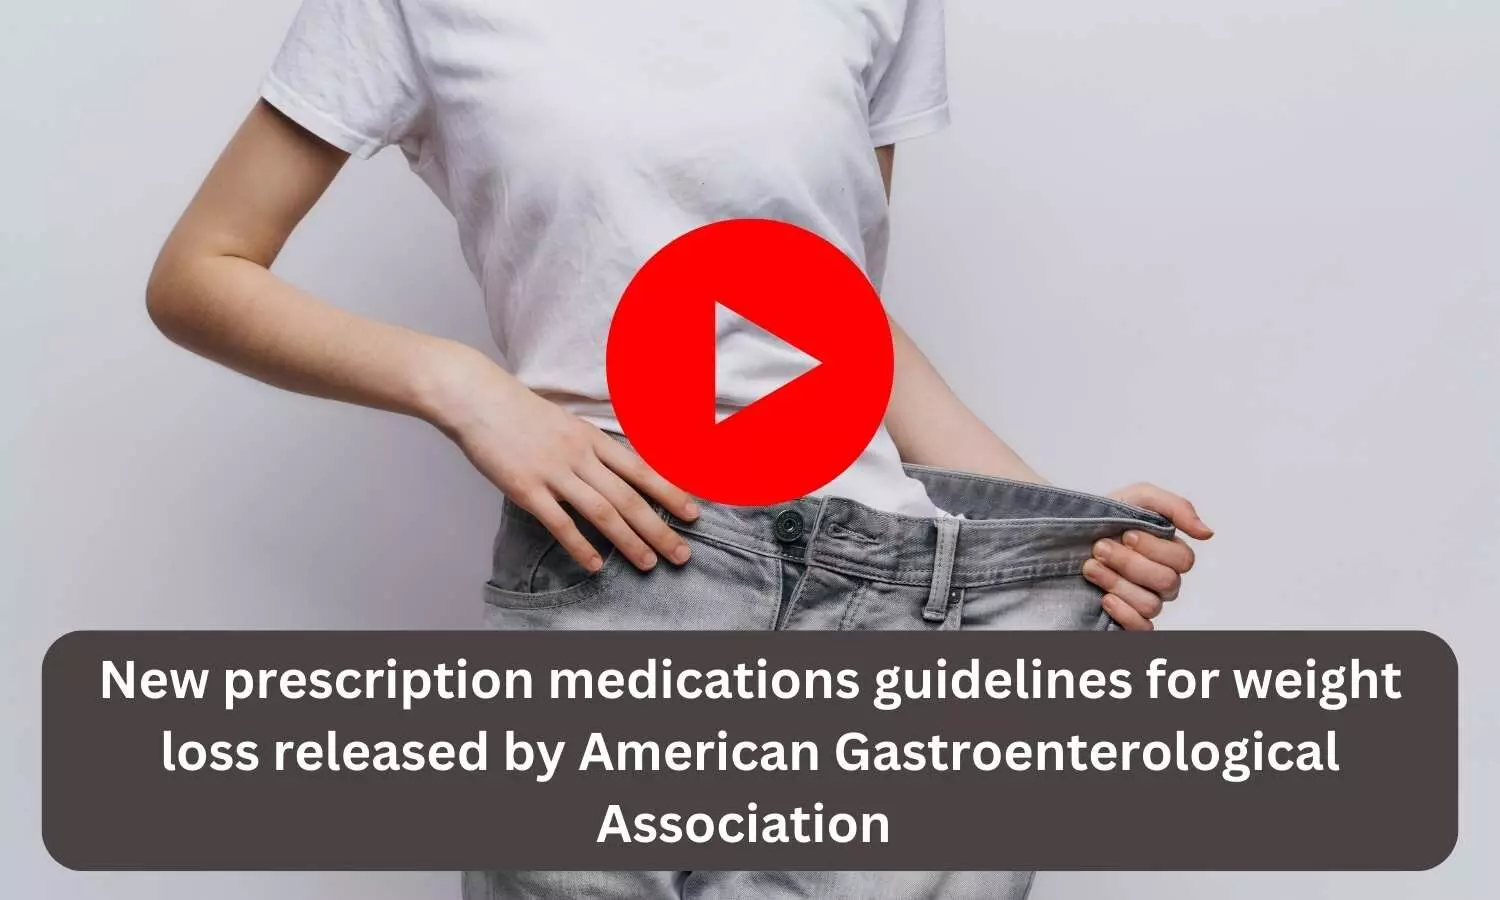 New prescription medications guidelines for weight loss released by American Gastroenterological Association